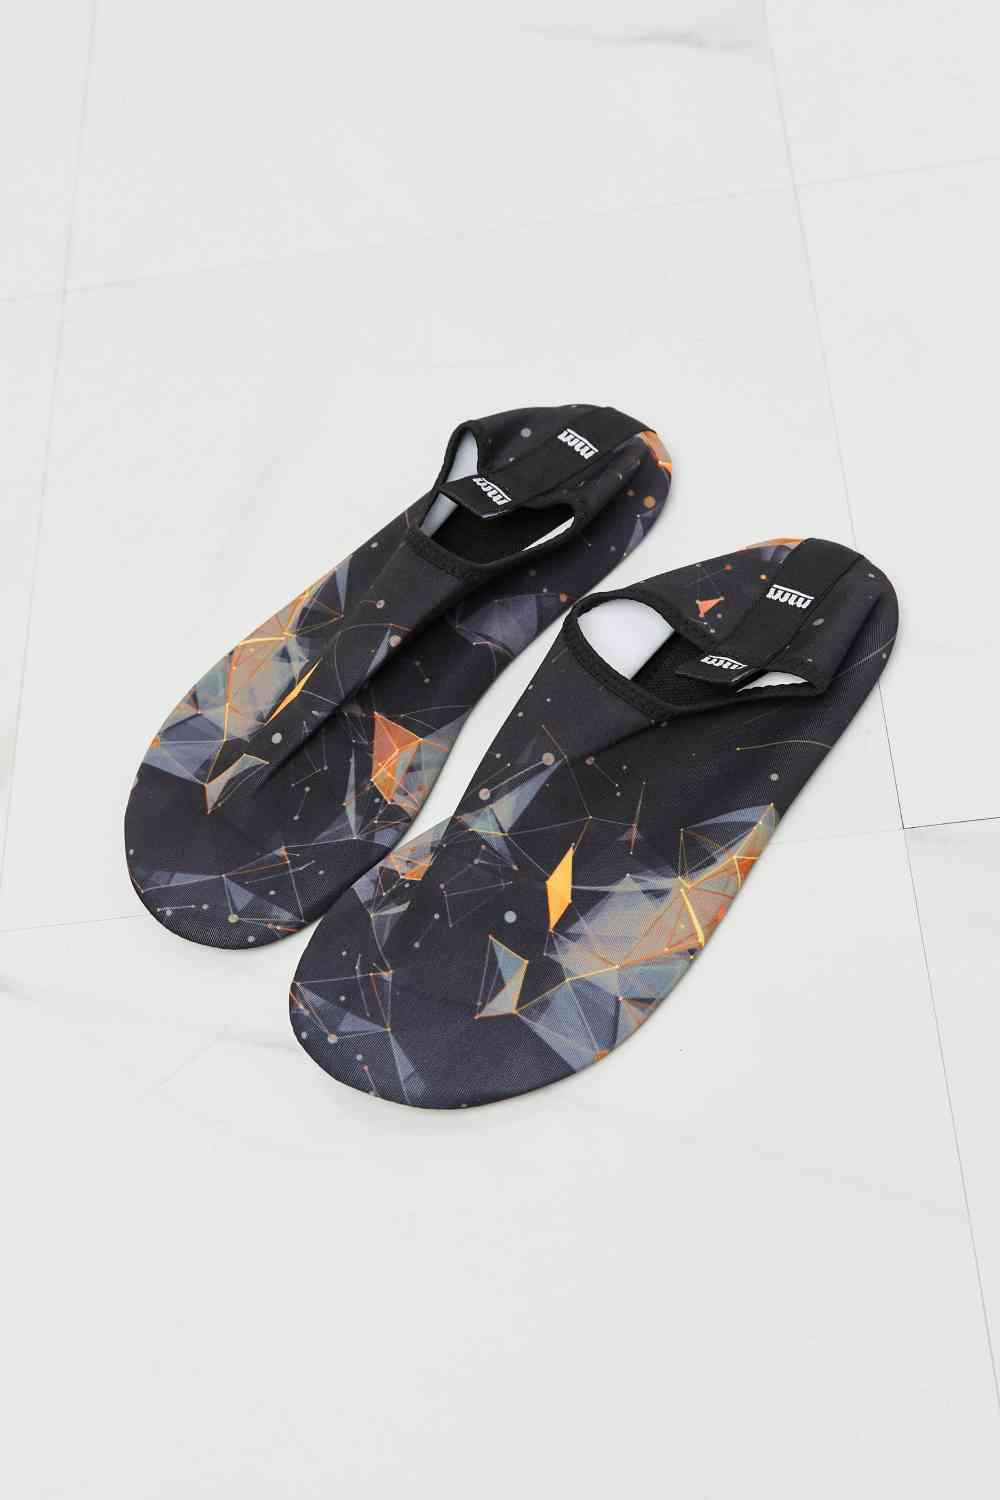 On The Shore Water Shoes in Black/Orange - Kawaii Stop - Aqua Footwear, Beach Adventures, Beach Days, Black and Orange, Comfortable Shoes, Durable Materials, Kayaking, Melody, Multicolored Design, Outdoor Activities, Rubber Sole, Safety First, Ship from USA, Slip-Resistant, Swimming, US Sizing, Vibrant Style, Water Protection, Water Shoes, Wet Surfaces